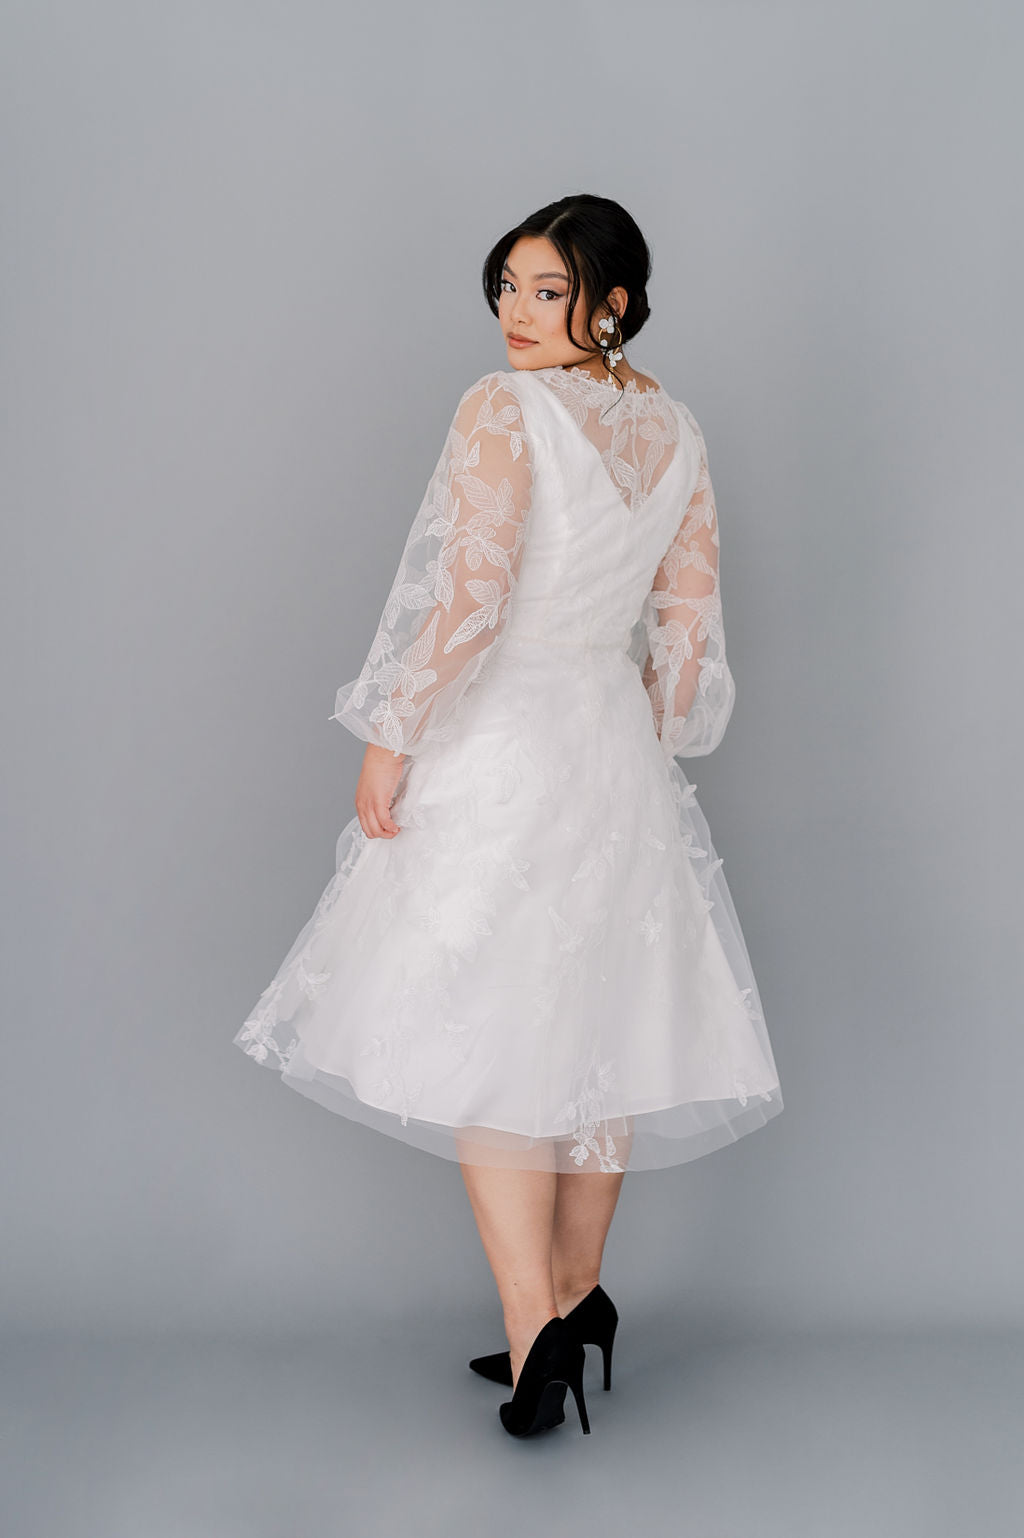 Lace tea length wedding dress with long poet sleeves and a line skirt. Custom made to order by Catherine Langlois, Toronto.